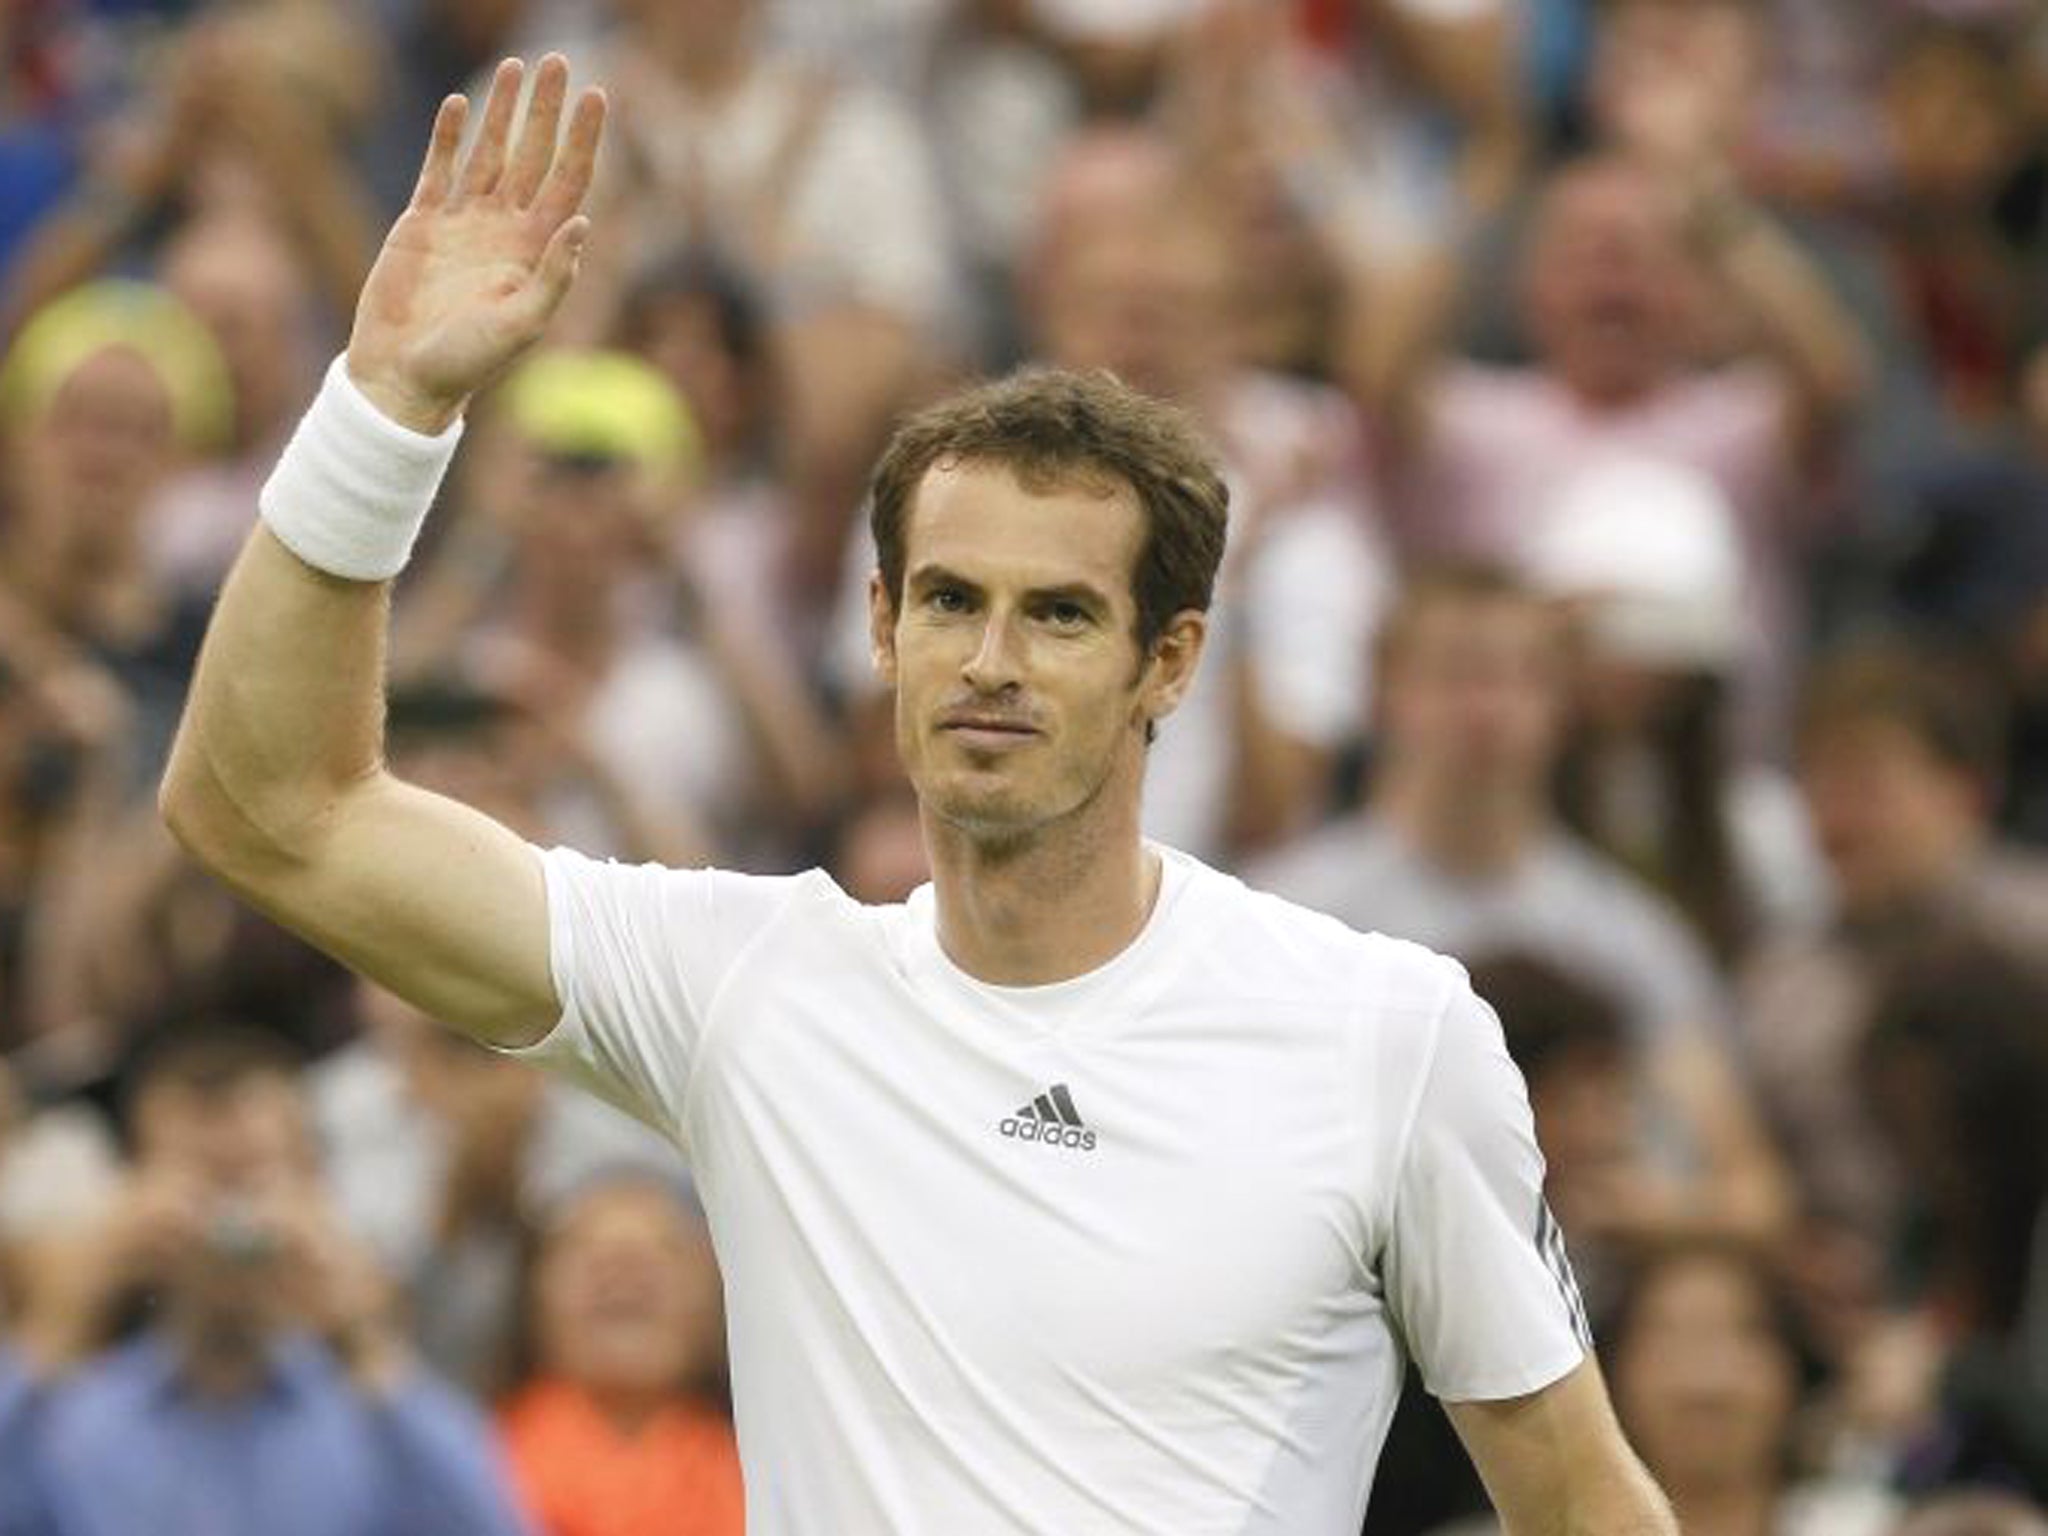 Andy Murray acknowledges the applause